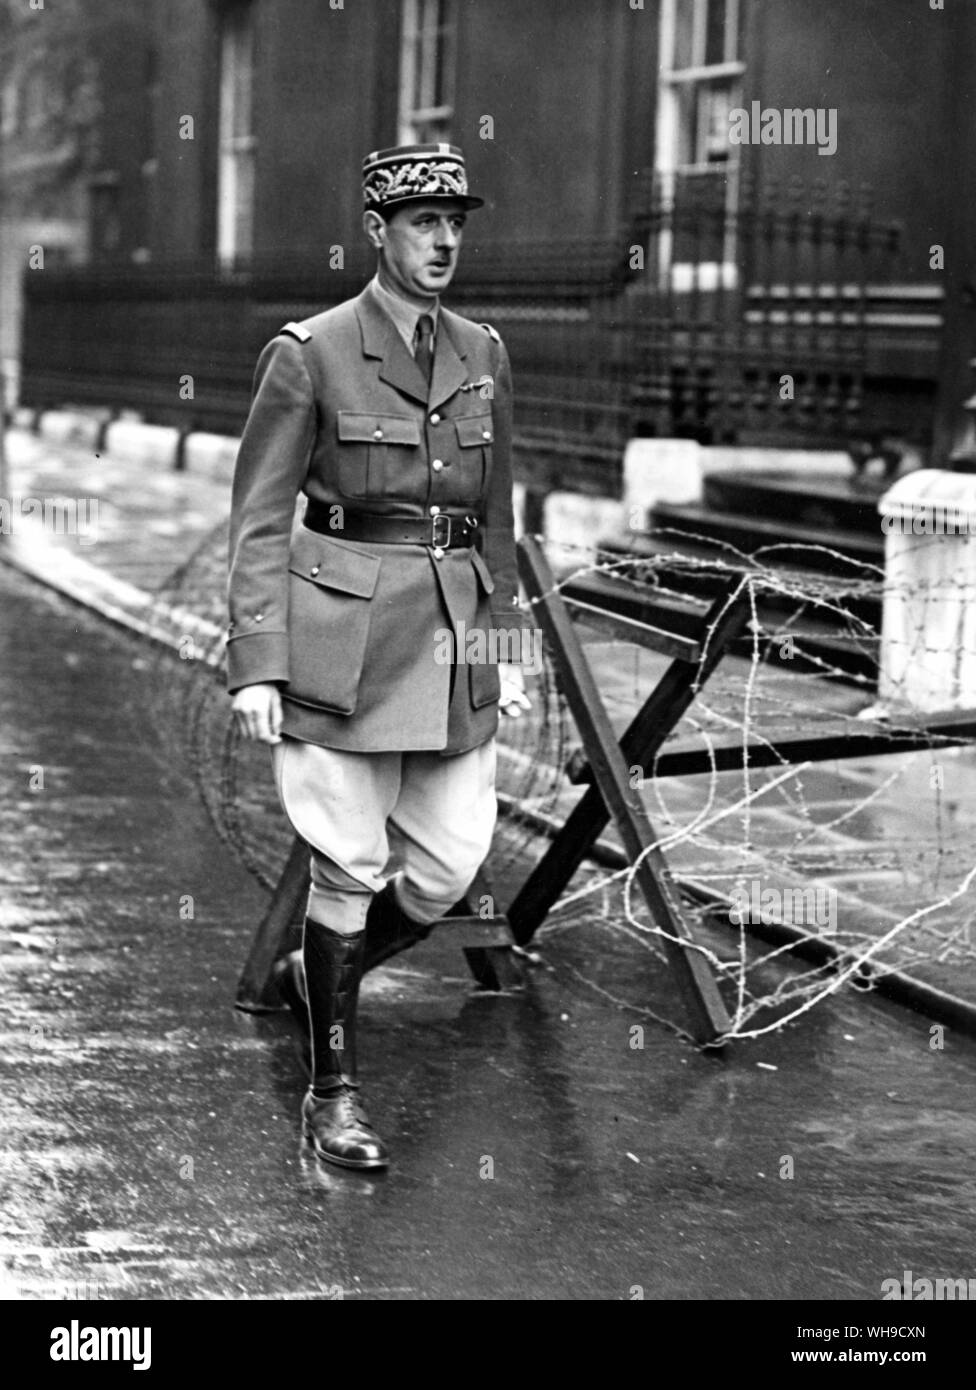 General Charles de Gaulle (1890-1970). French General and first French president of the Fifth Republic, 1958-69. Photographed leaving Downing Street after a dramatic broadcast that France and Germany signed an armistice, June 1940. Stock Photo